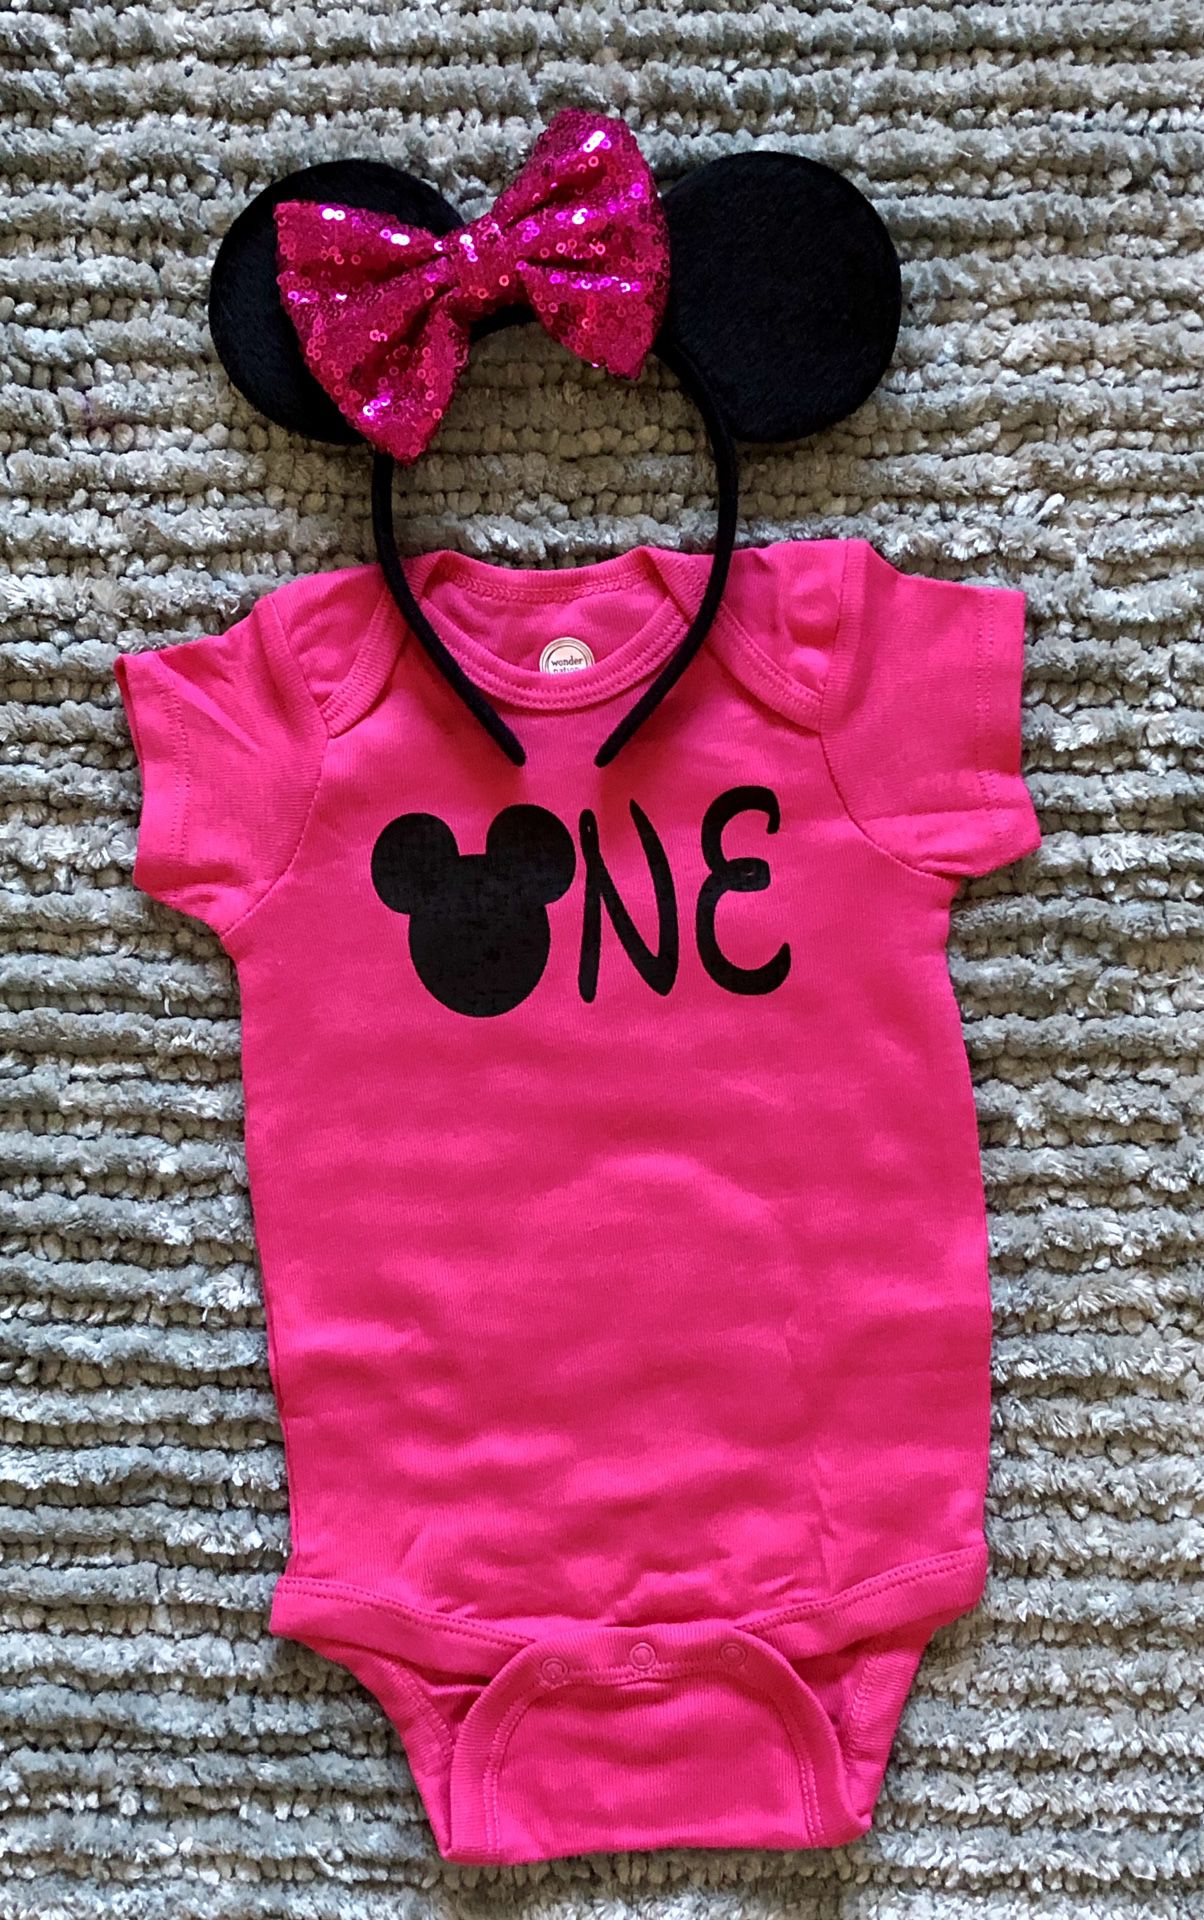 Minnie Mouse 🐭 Pink 1st Birthday Shirt & Sequin Headband Ears 12 Months